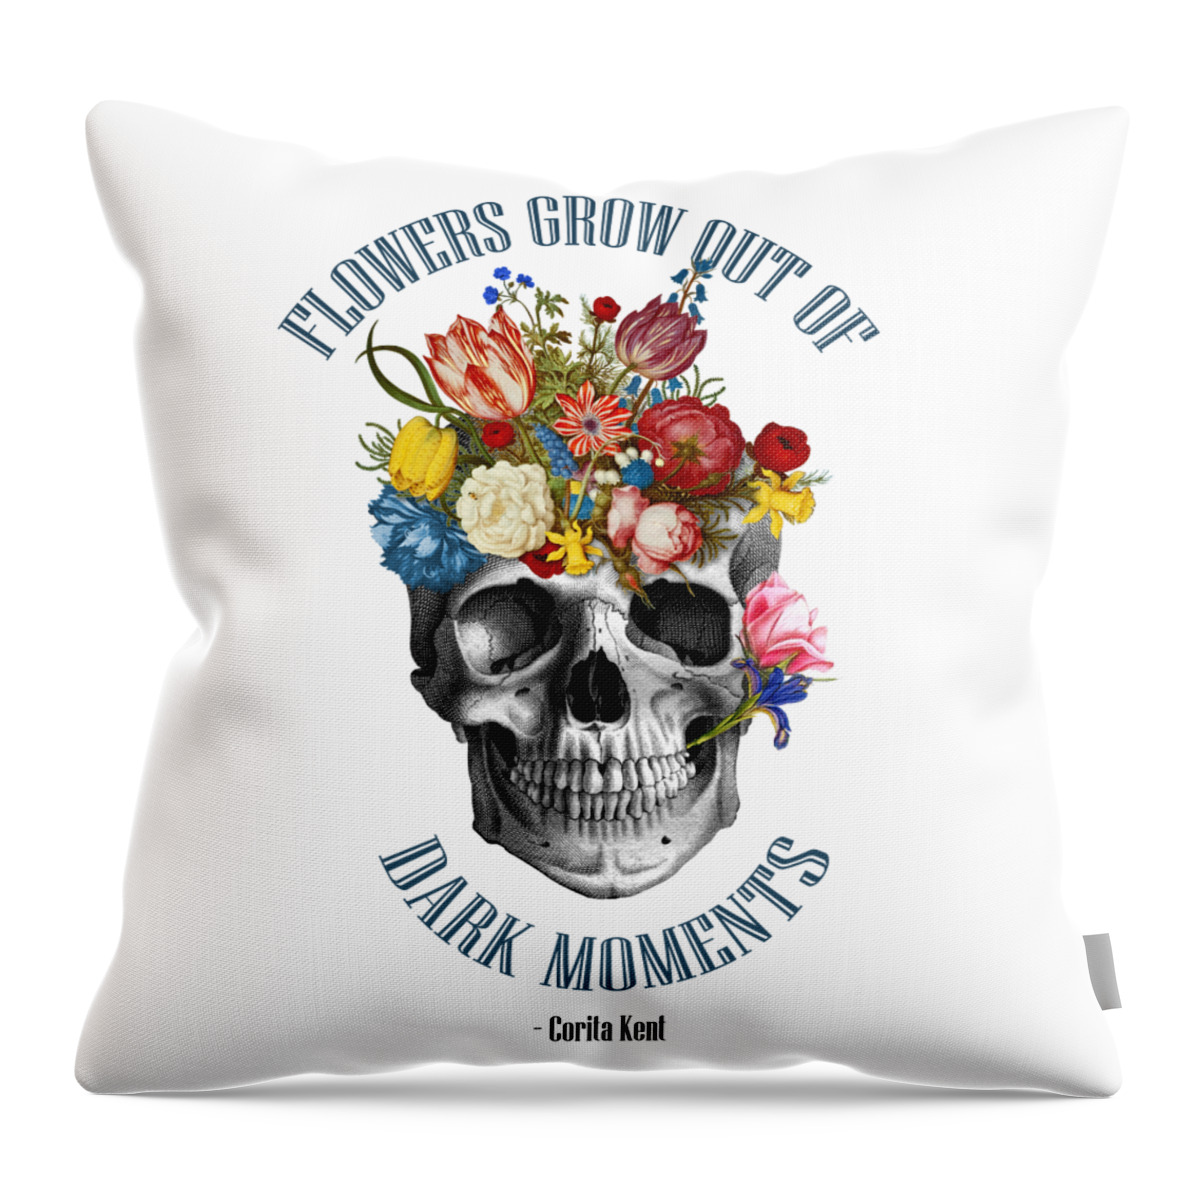 Skull Throw Pillow featuring the digital art Flowers grow out of dark moments skull by Madame Memento